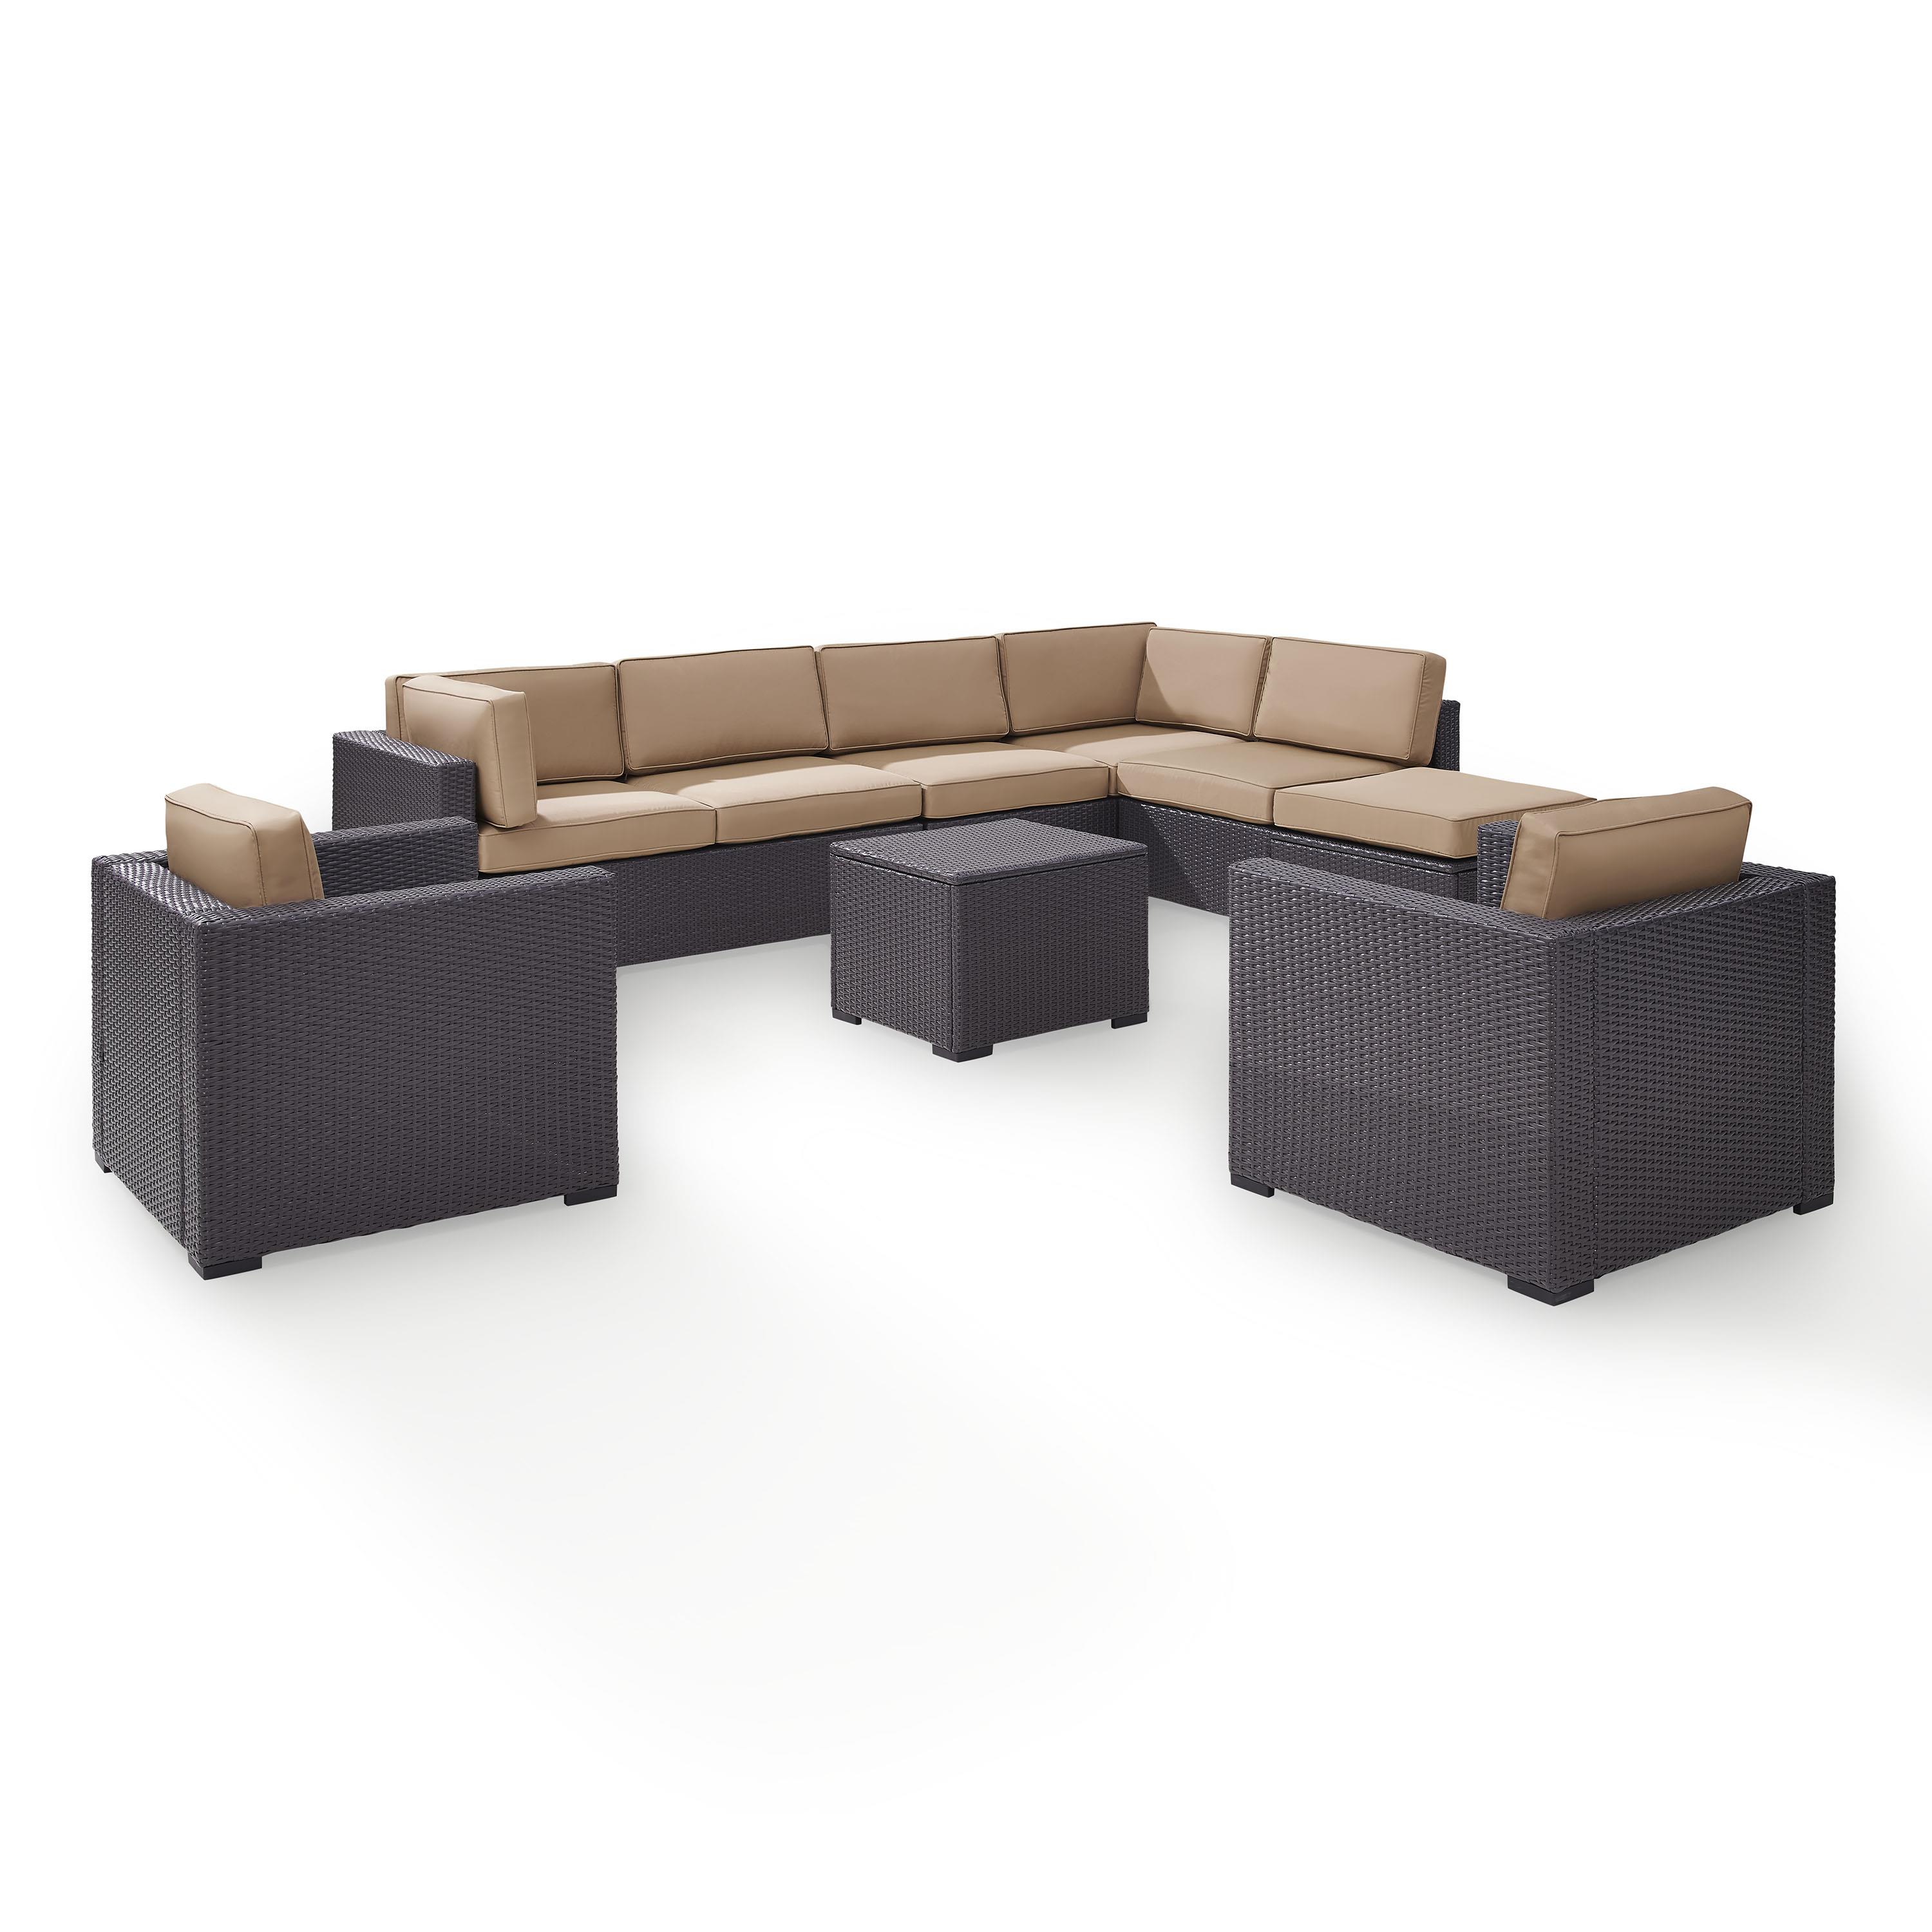 Crosley Furniture Biscayne 7 Piece Metal Patio Sectional Set in Brown/Mocha - image 2 of 4